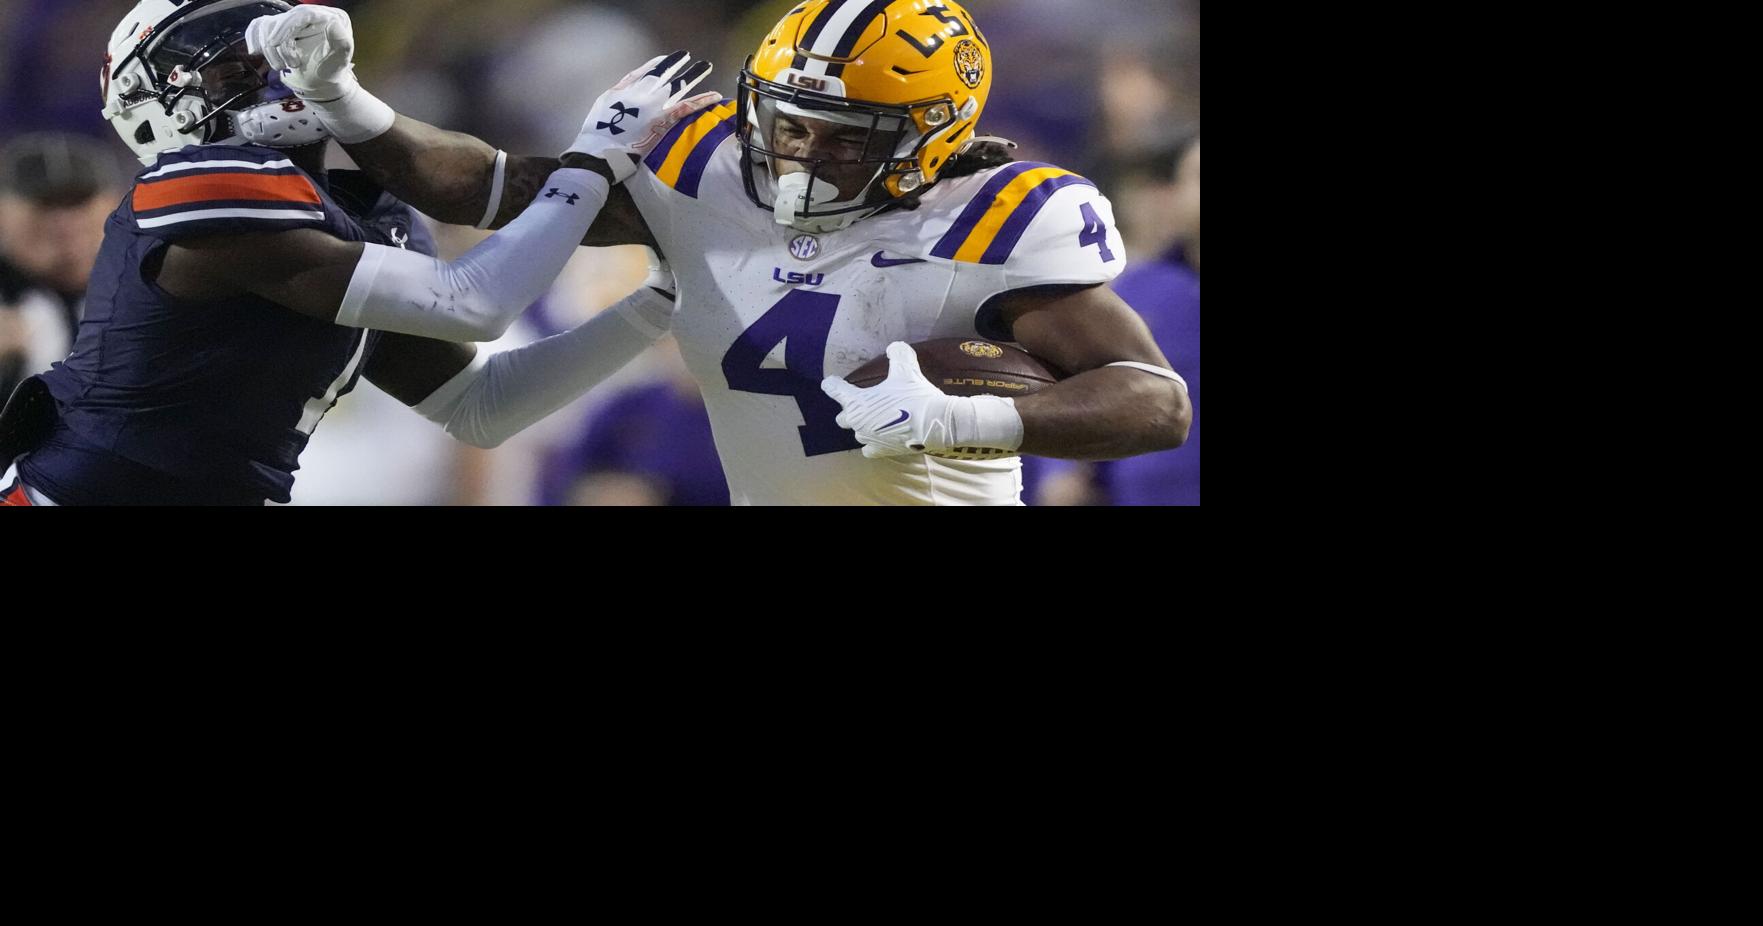 LSU football makes history as first to fully embrace custom player jerseys